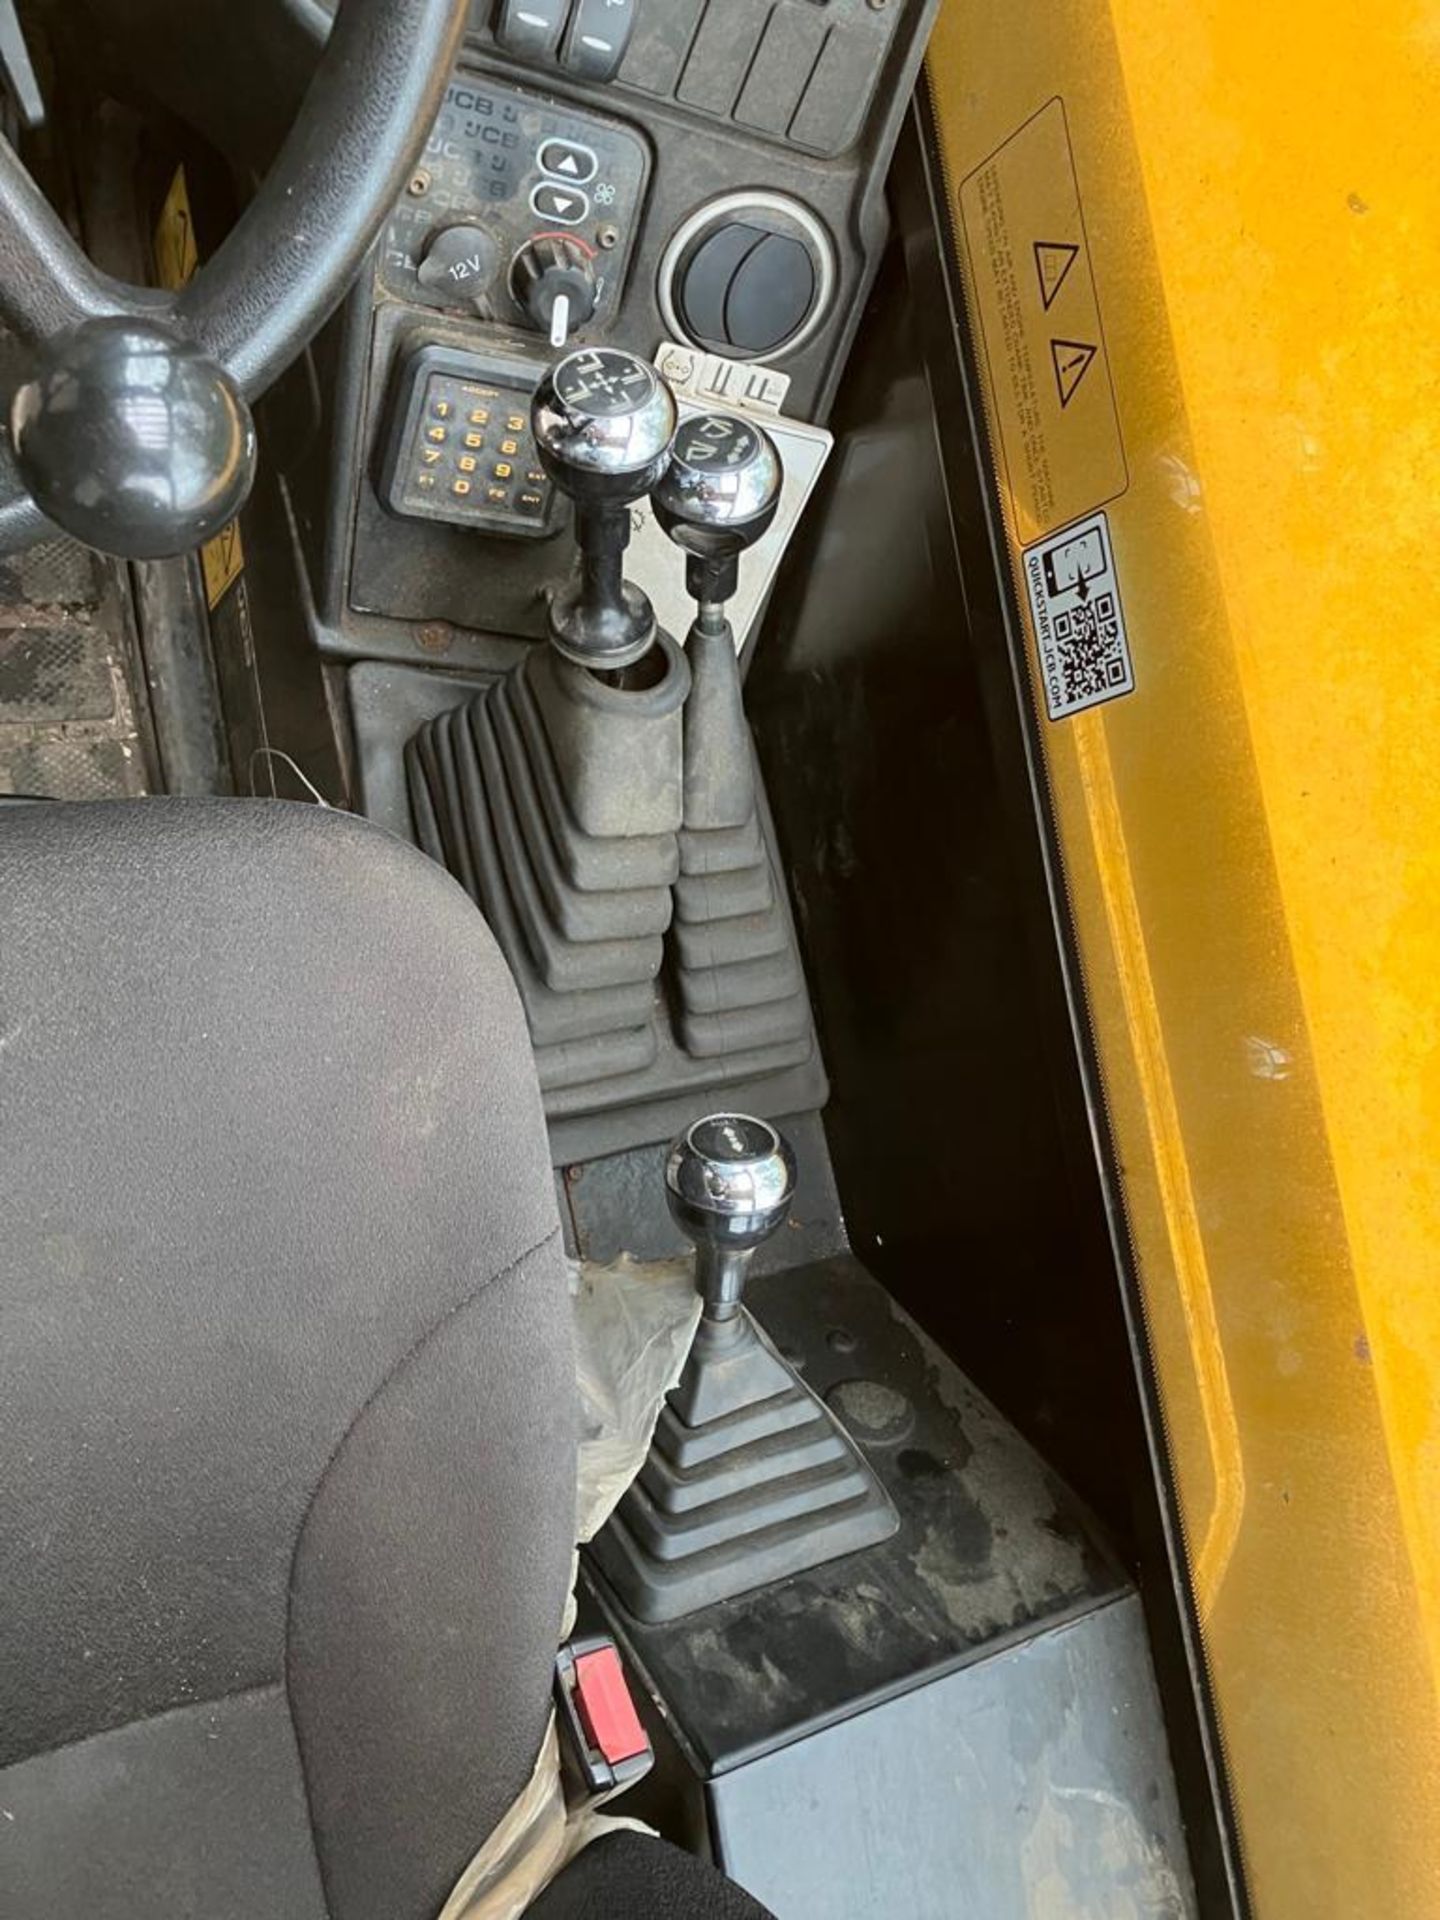 2018 JCB Loadall 531-70 on 400/80-24 wheels and tyres. Understood to be speed restricted to 20 Kph. - Image 6 of 8